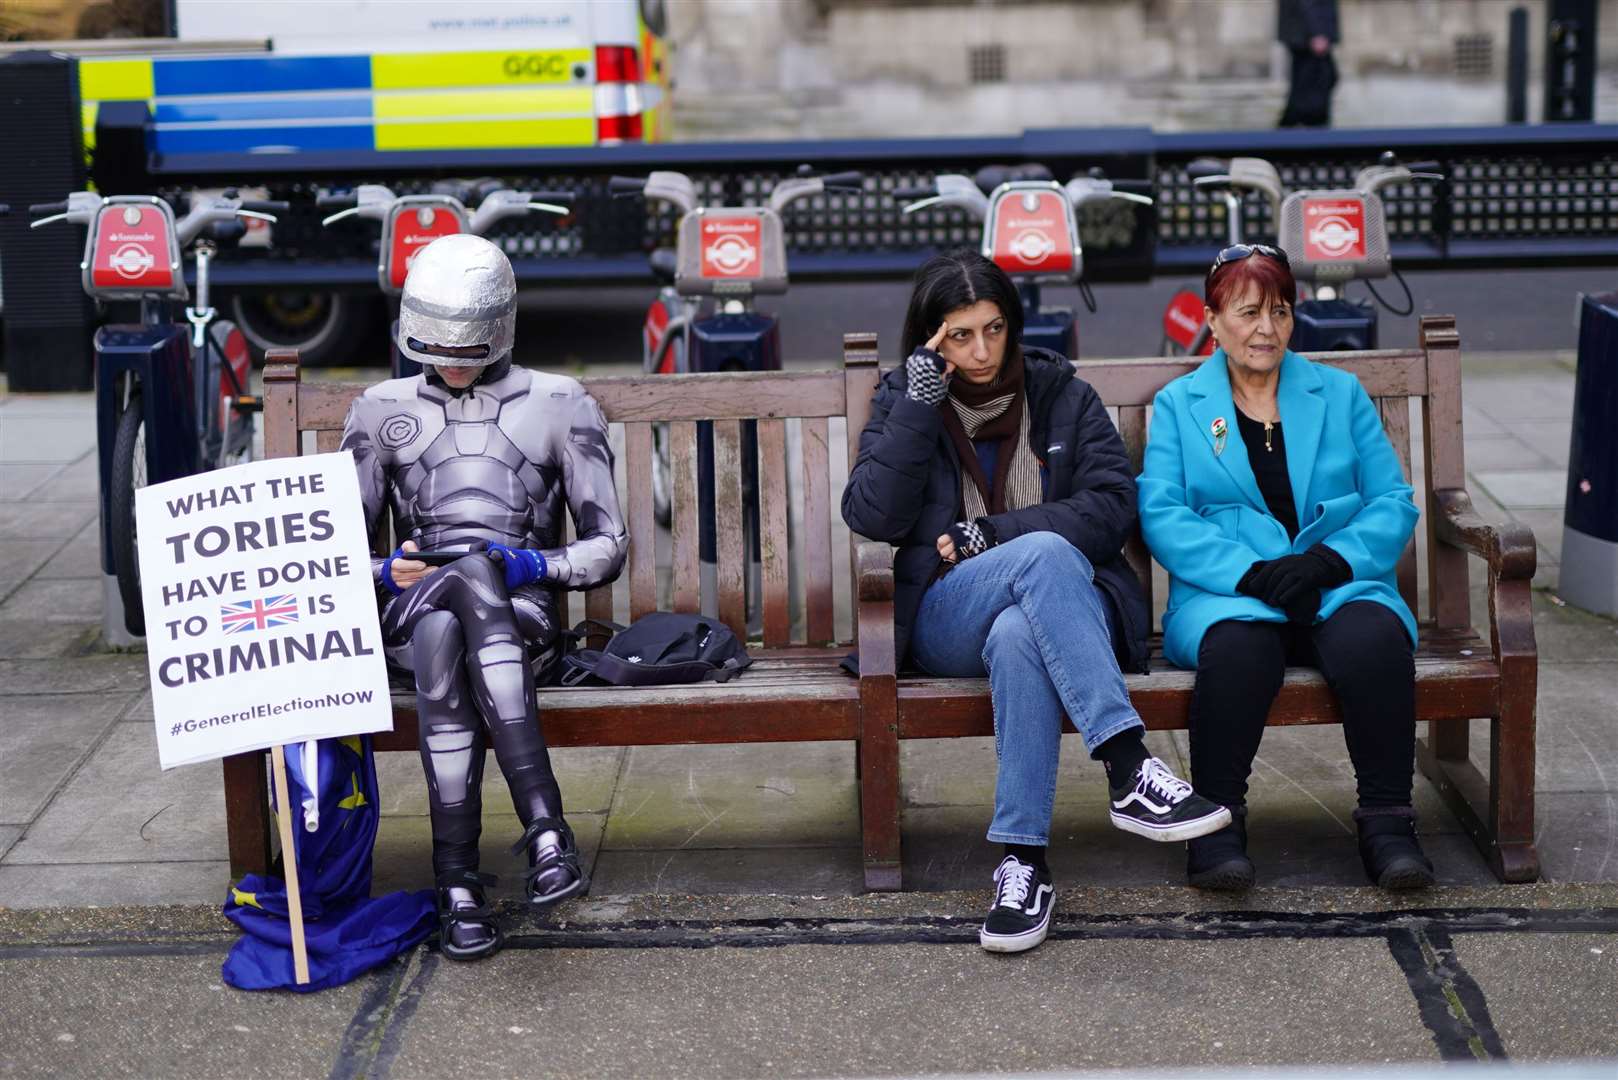 A protester dressed as RoboCop sits on a bench near the Palace of Westminster, as the Chancellor delivers his Budget to Parliament (Jordan PettittPA)